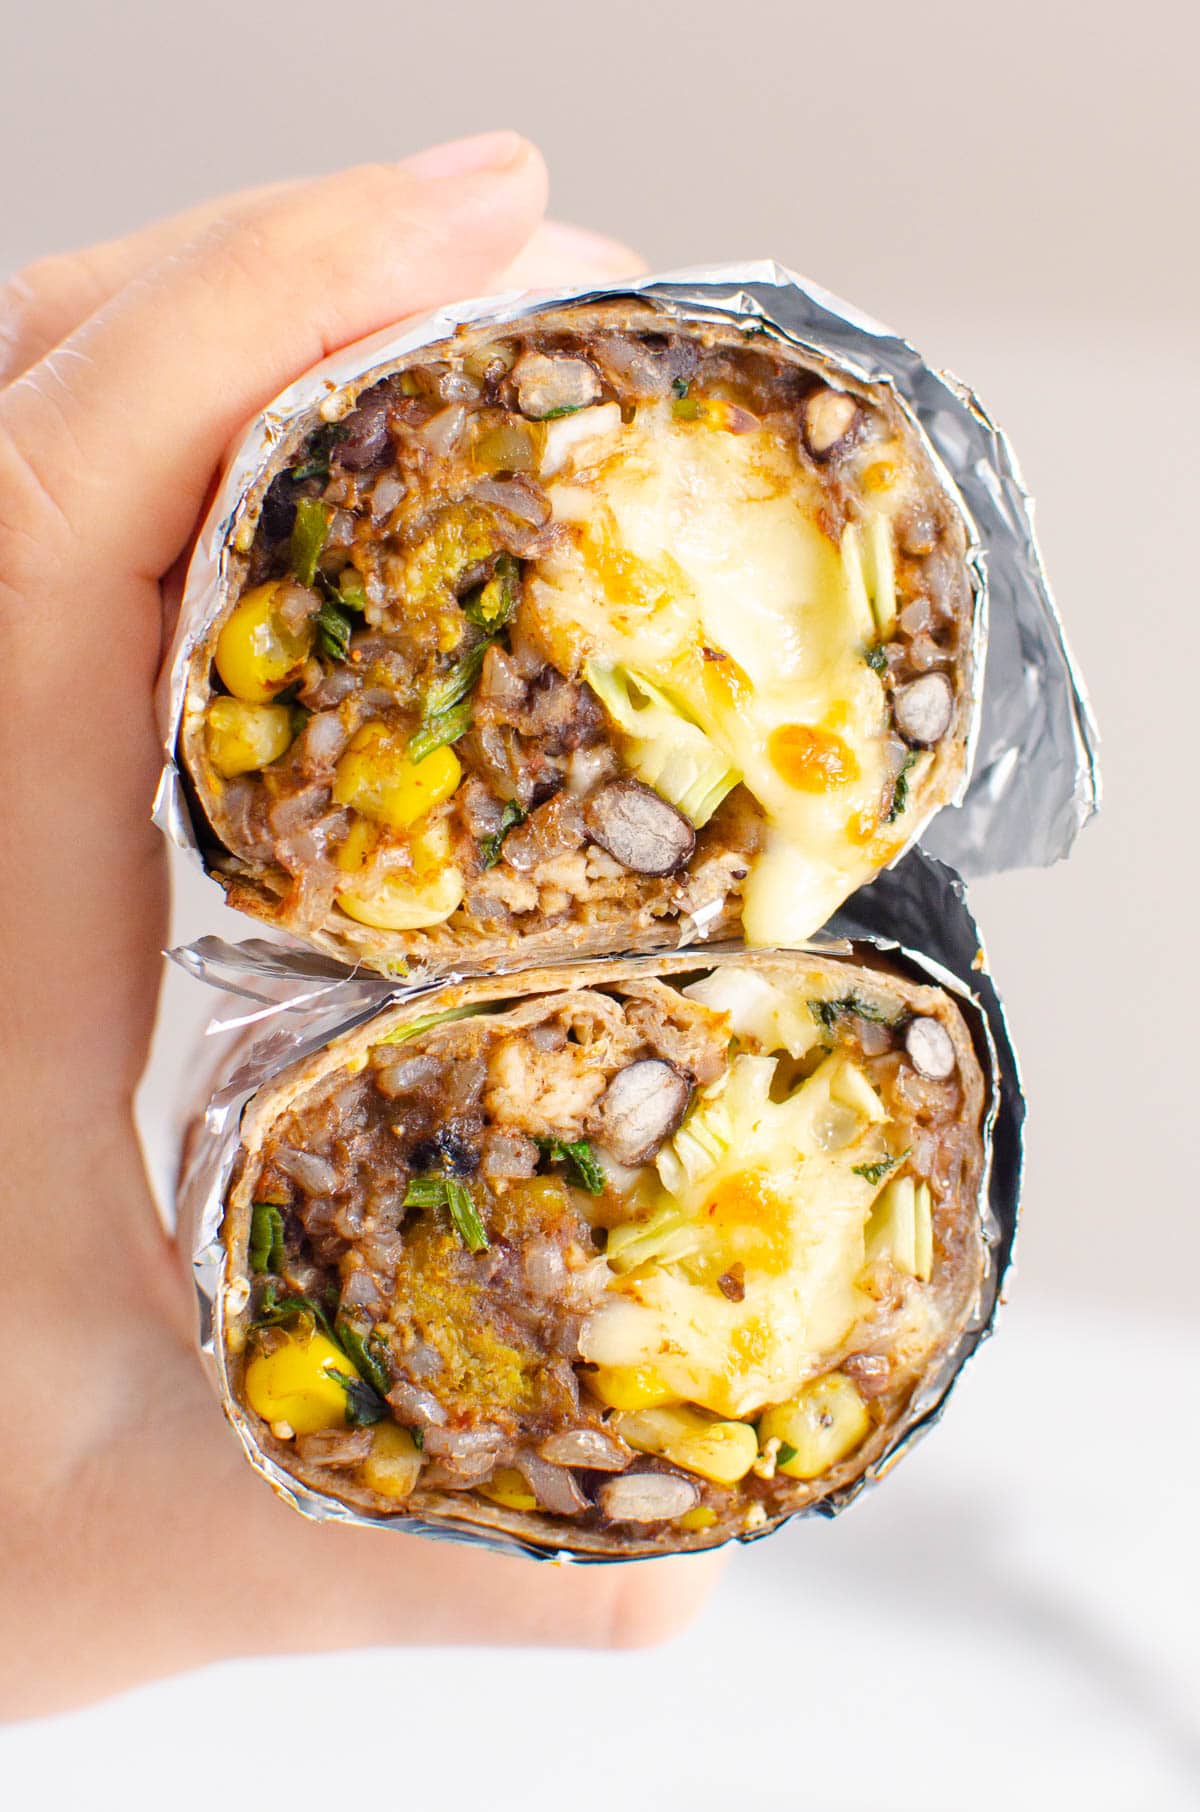 Person holding two chicken burritos showing texture inside.